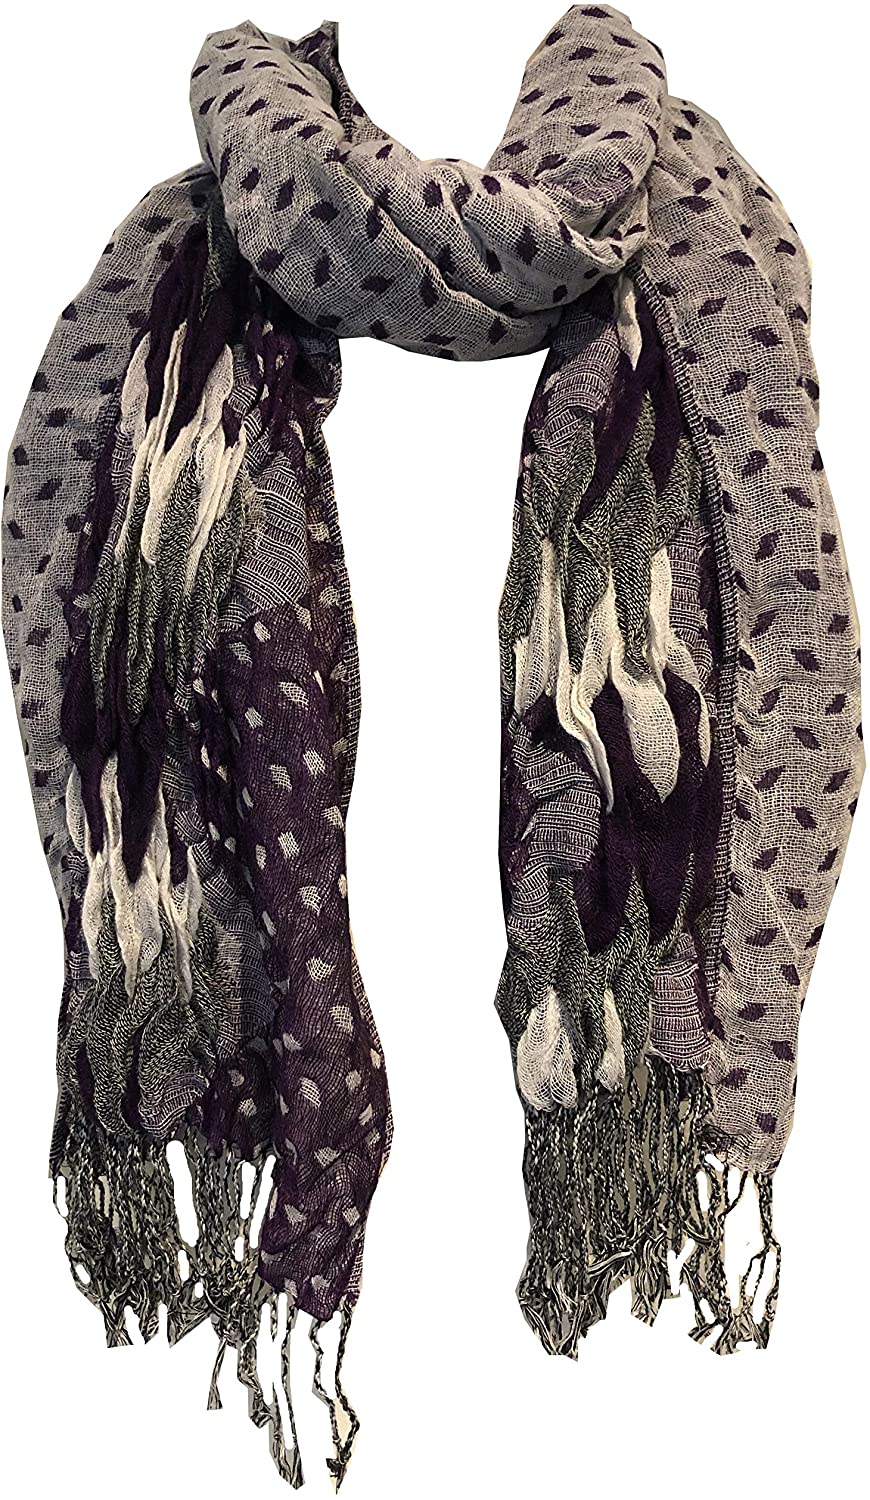 Pamper Yourself Now Purple, White and Grey Chunky Diamond Design Stretchy Blanket Scarf/wrap. Great Present/Gift for mums, Girlfriends or Wife.